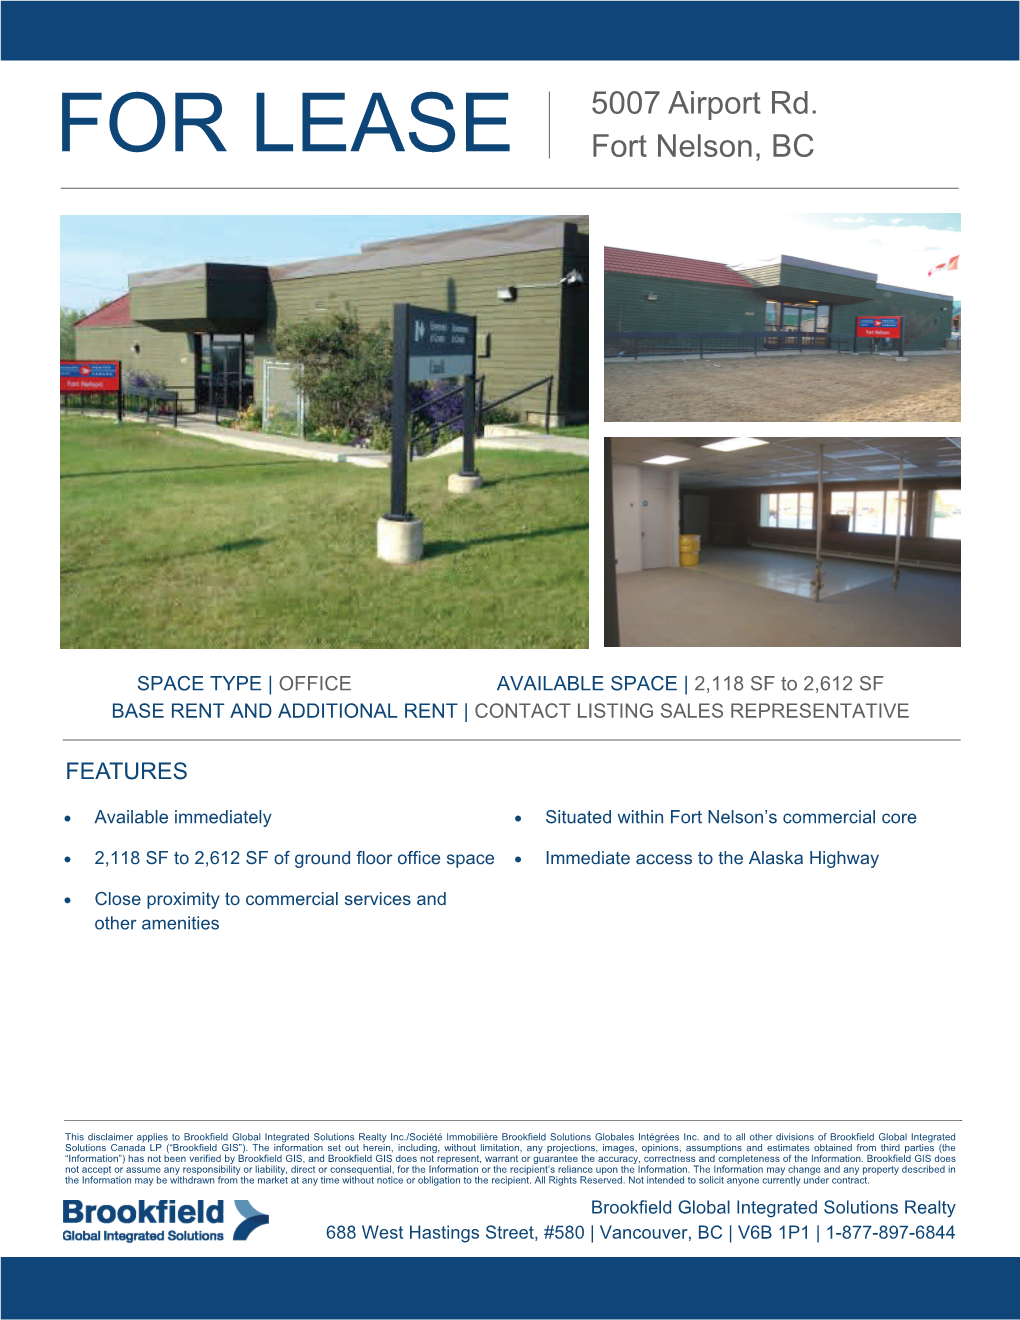 FOR LEASE Fort Nelson, BC